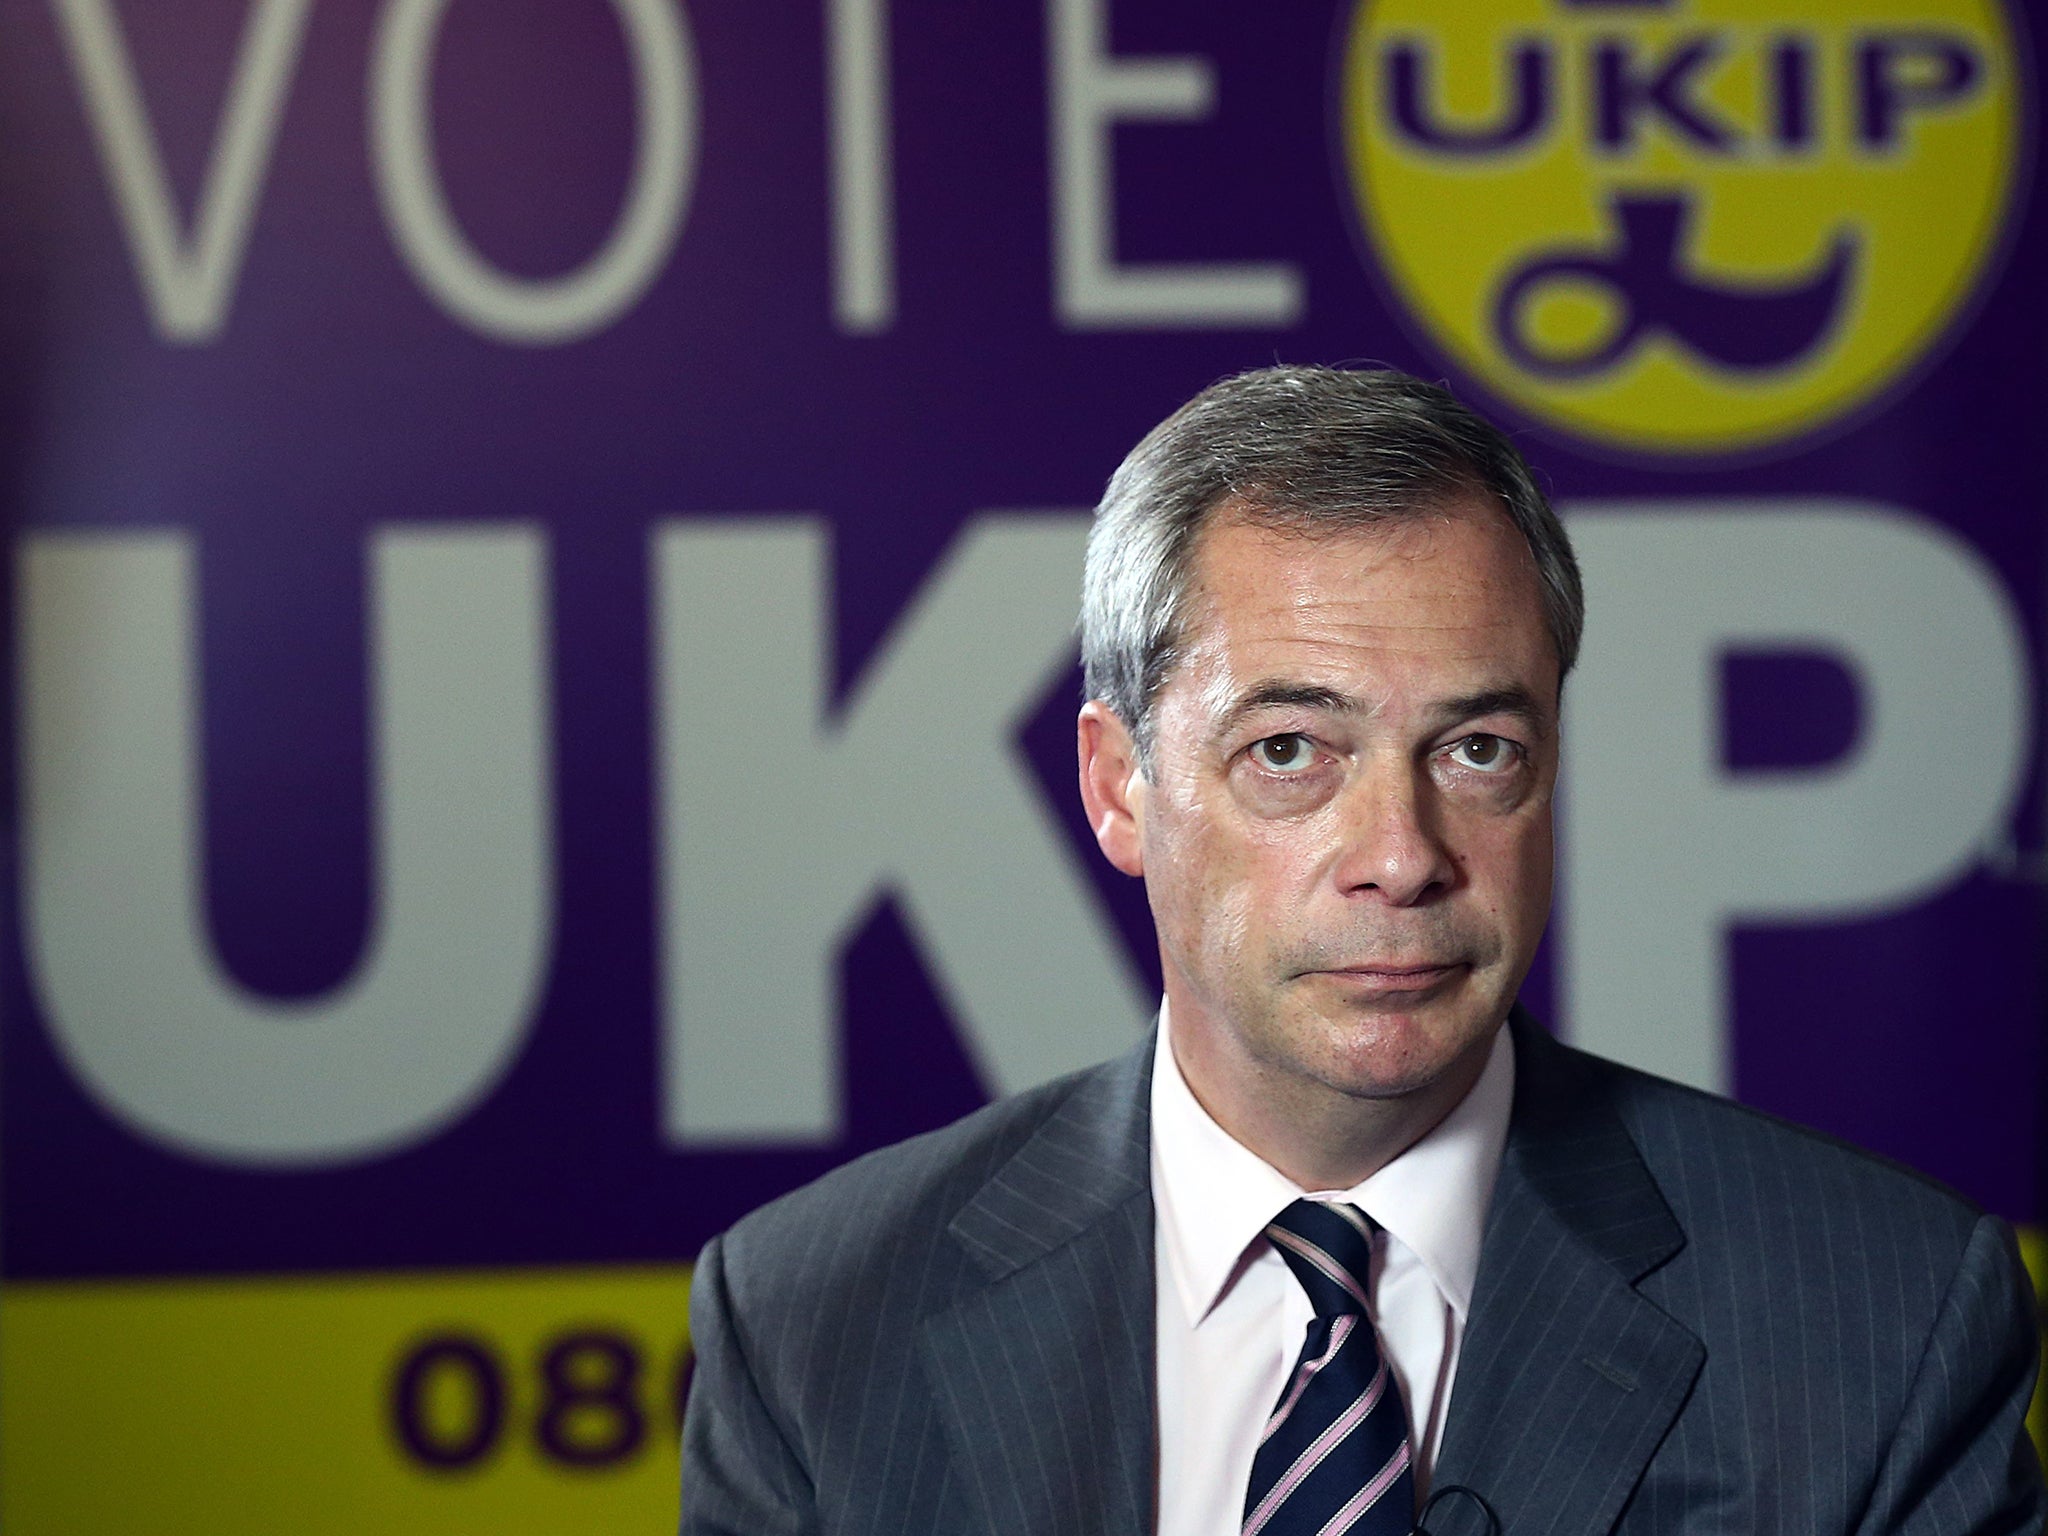 Nigel Farage has welcomed the Pub Landlord's announcement as the arrival of 'serious competition'